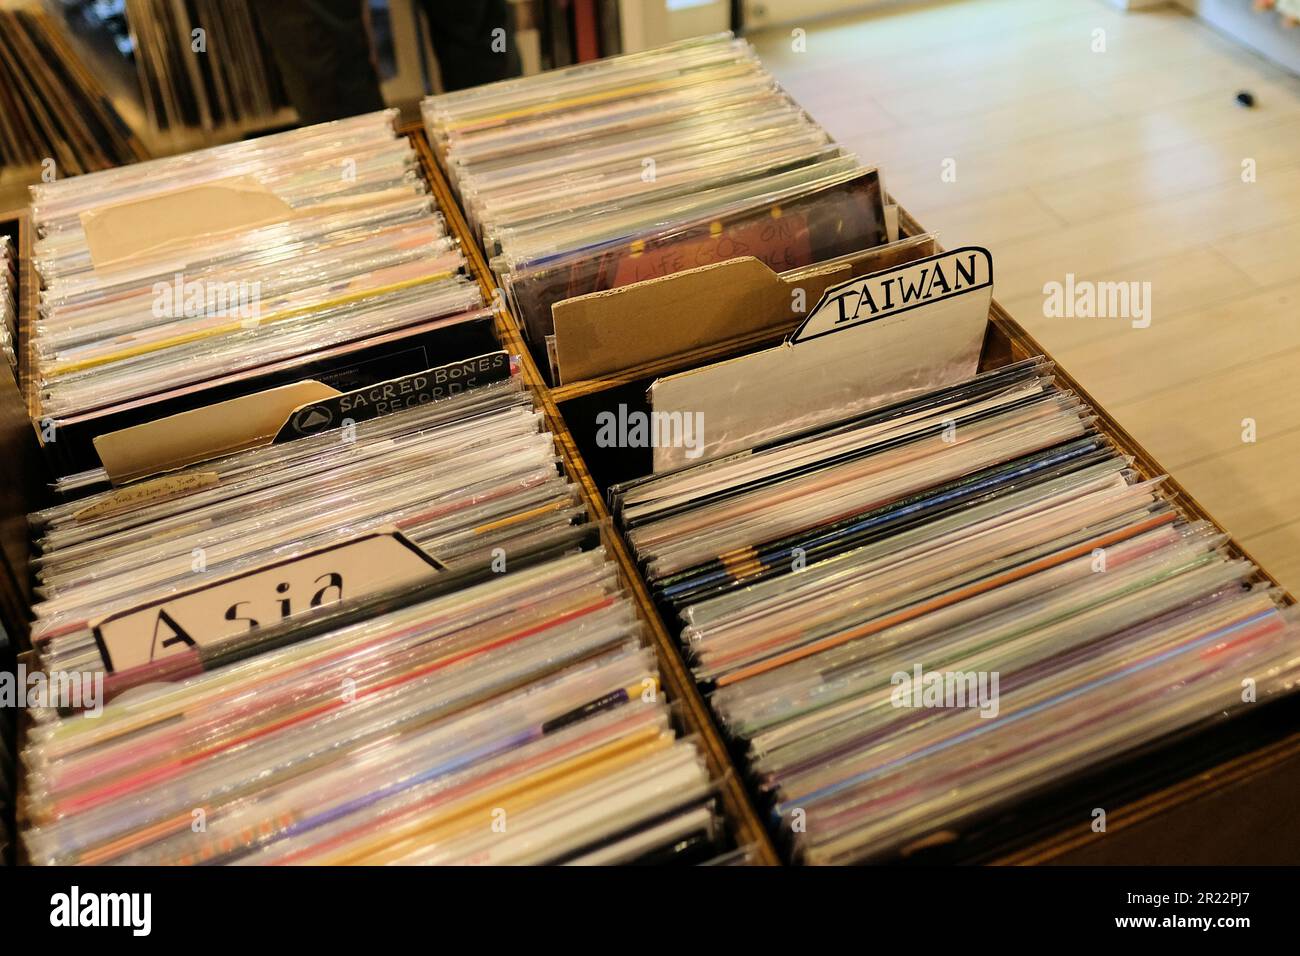 White Rabbit Records, an independent record store selling indie and alternative music on vinyl and cd located in the Da'an District, Taipei, Taiwan. Stock Photo